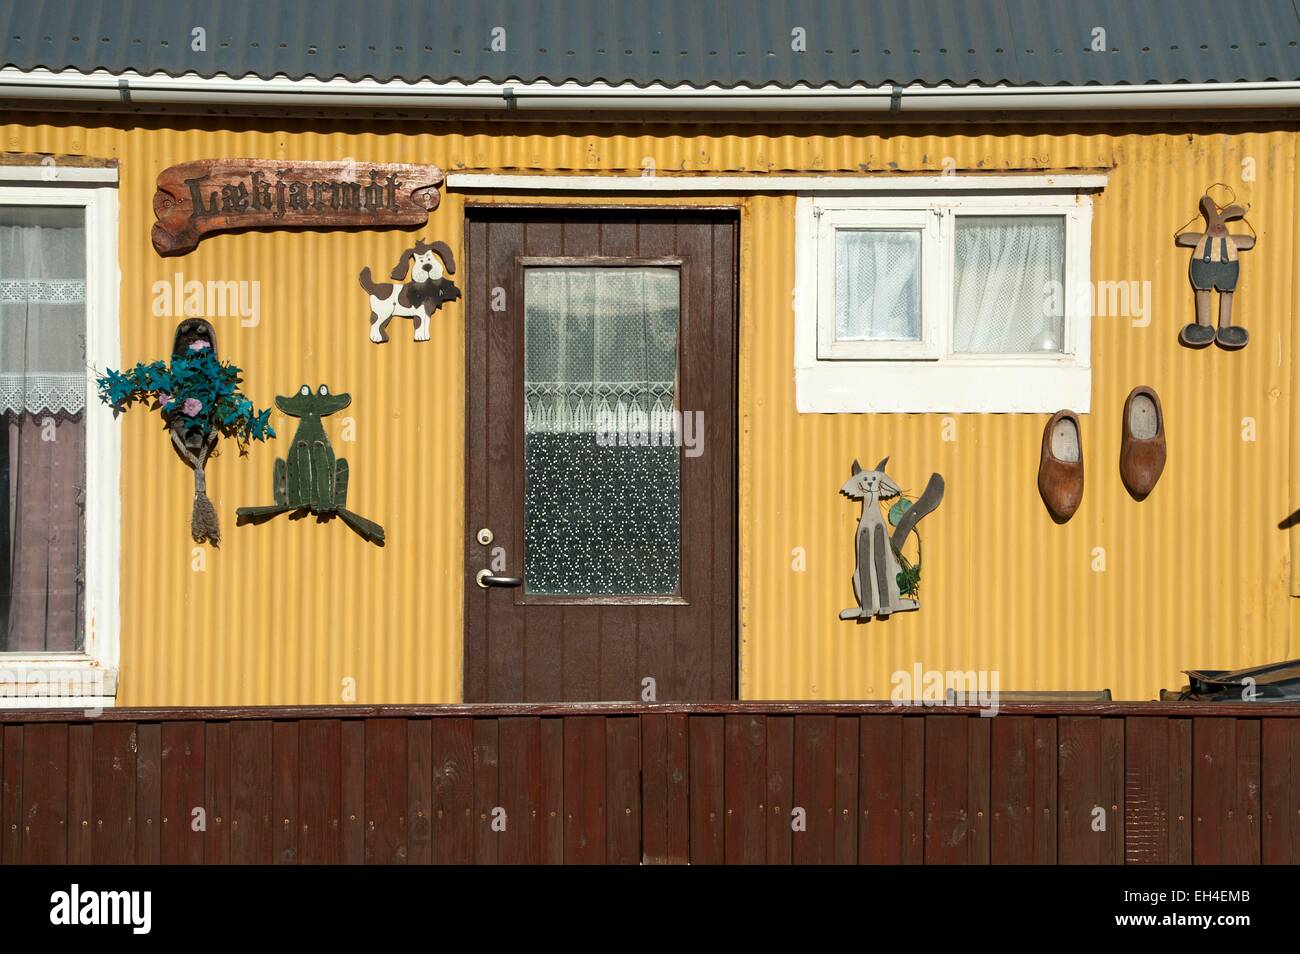 Iceland Sudurland, Vik, a colorful house facade decorated Stock Photo